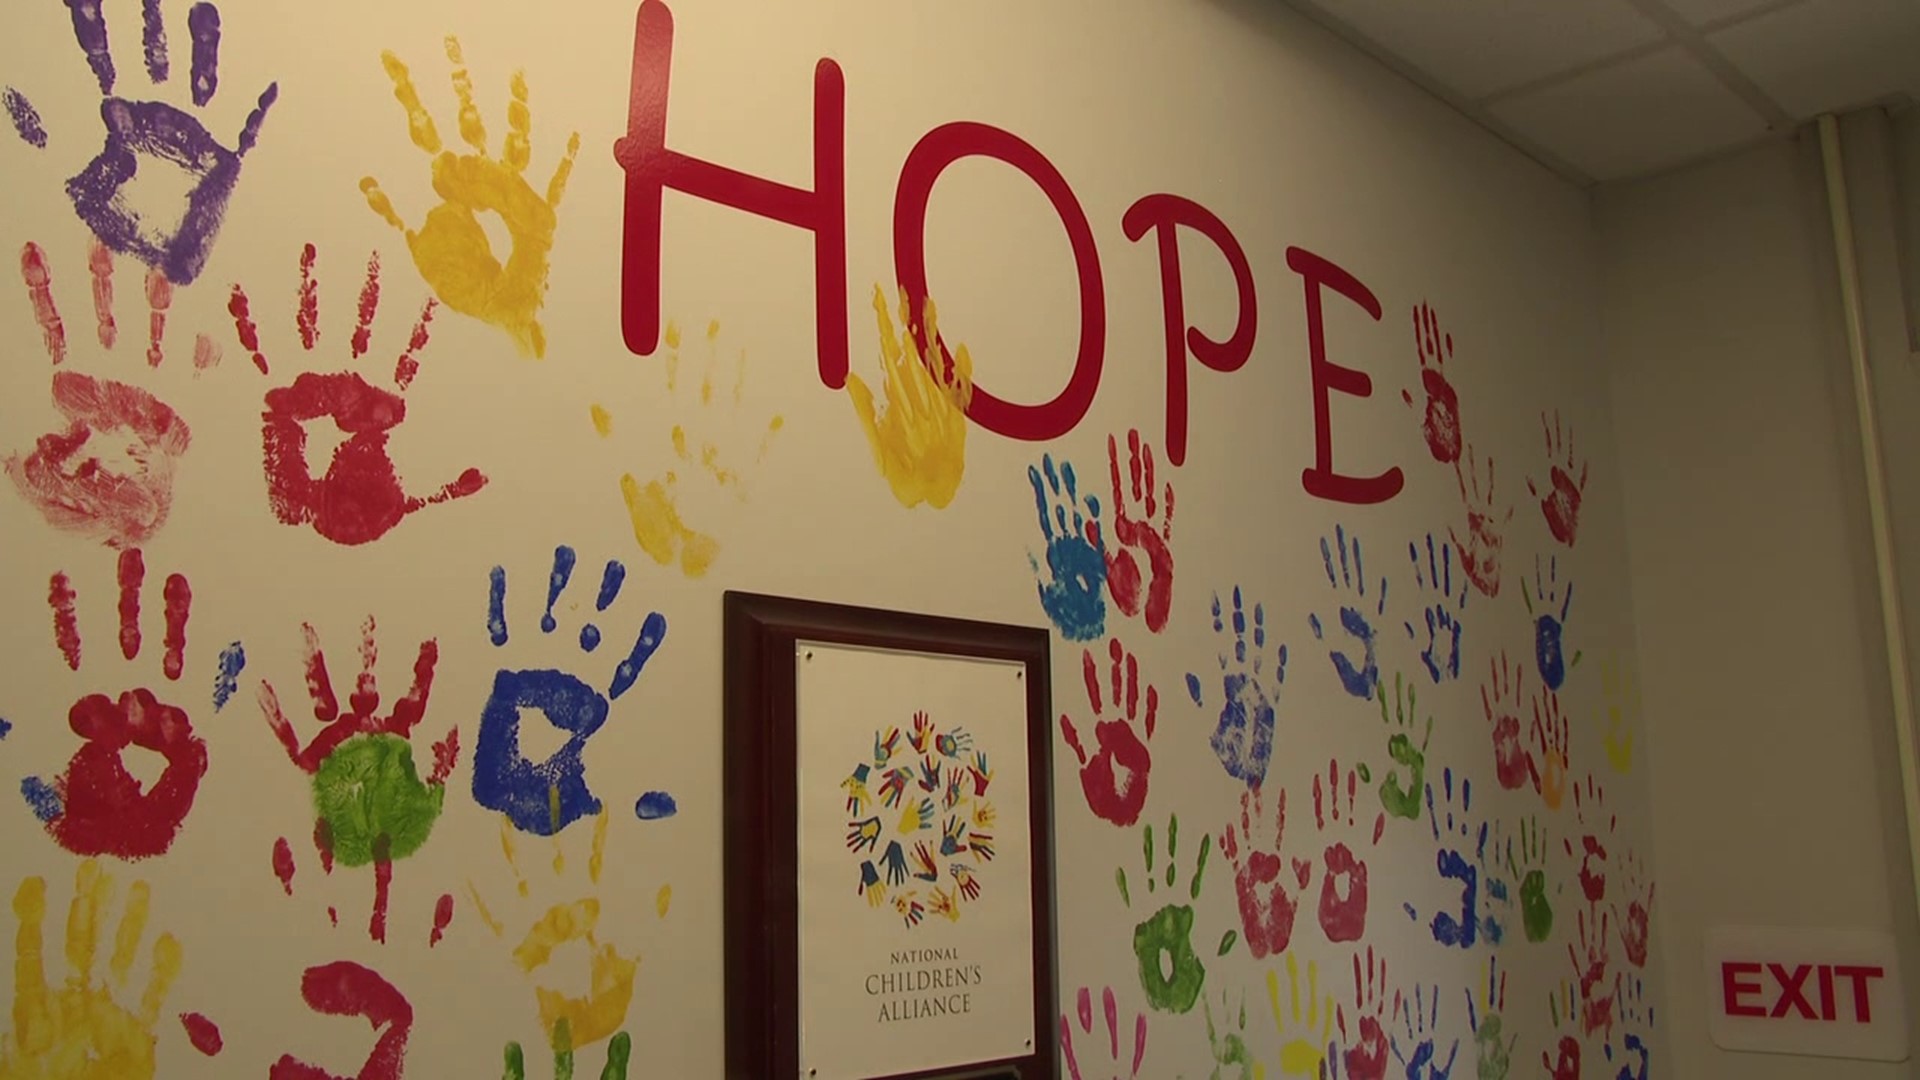 National Child Abuse Prevention Month is dedicated to raising awareness and preventing child abuse. Geisinger's Child Advocacy Center in Sunbury aims to do just that